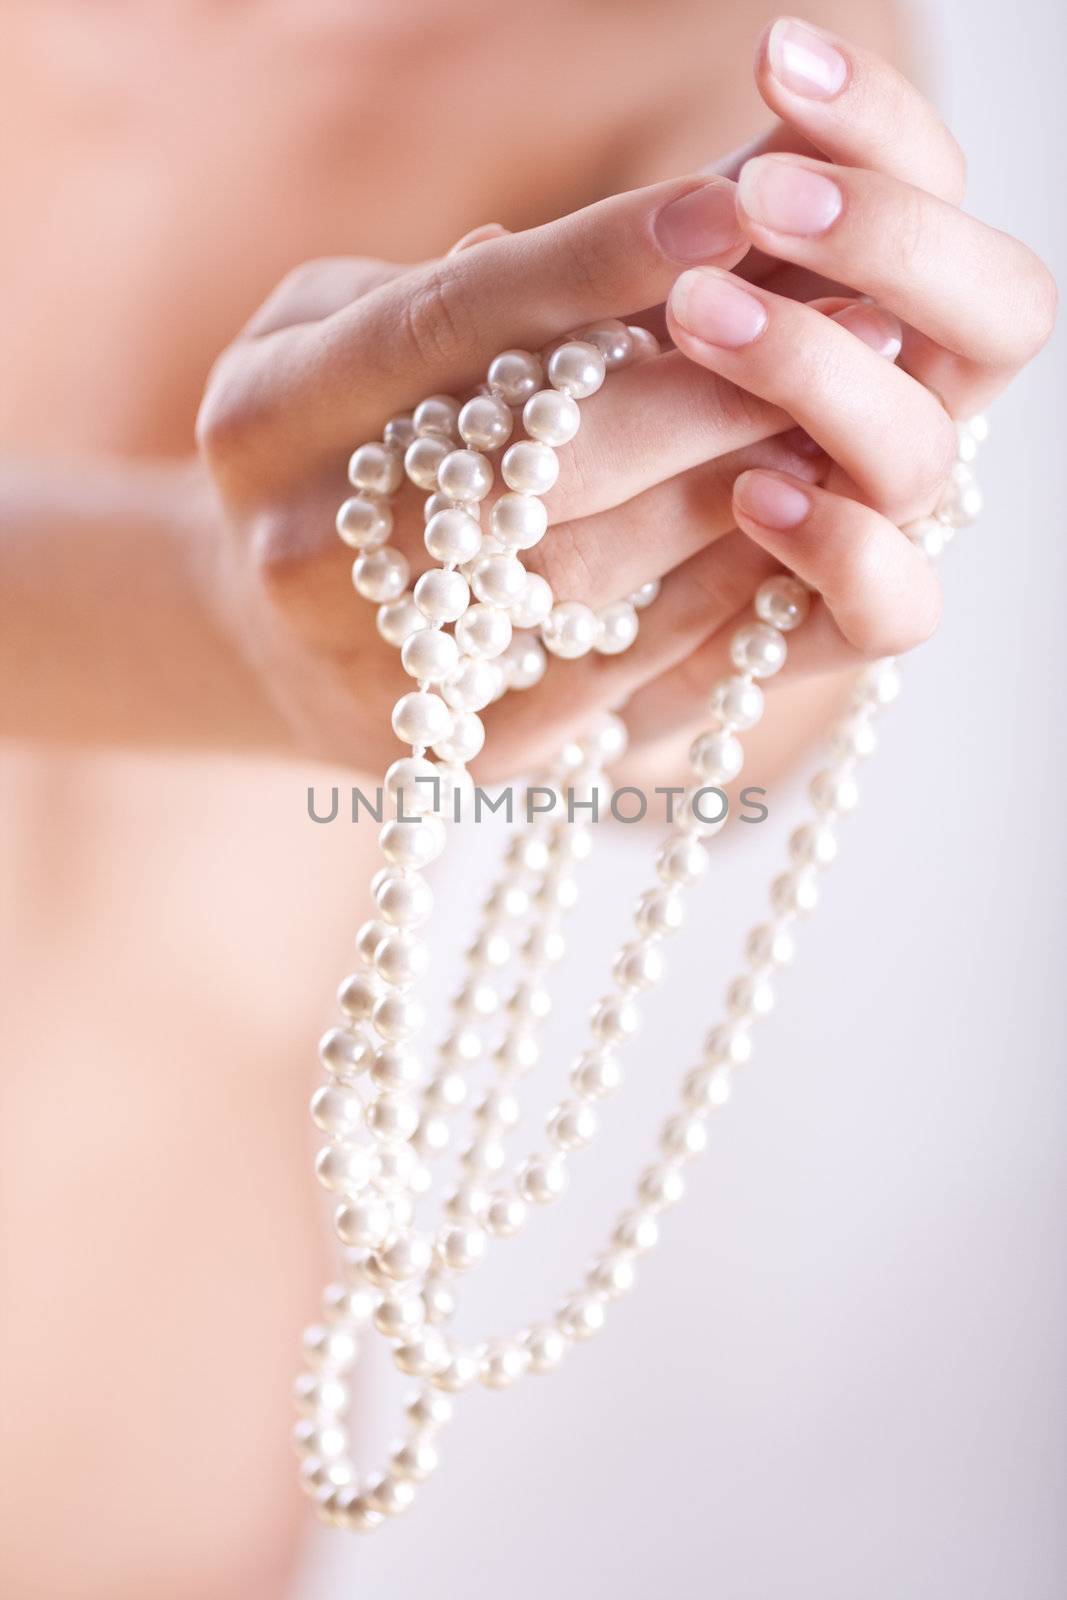 pearls in the women's hands by Lupen